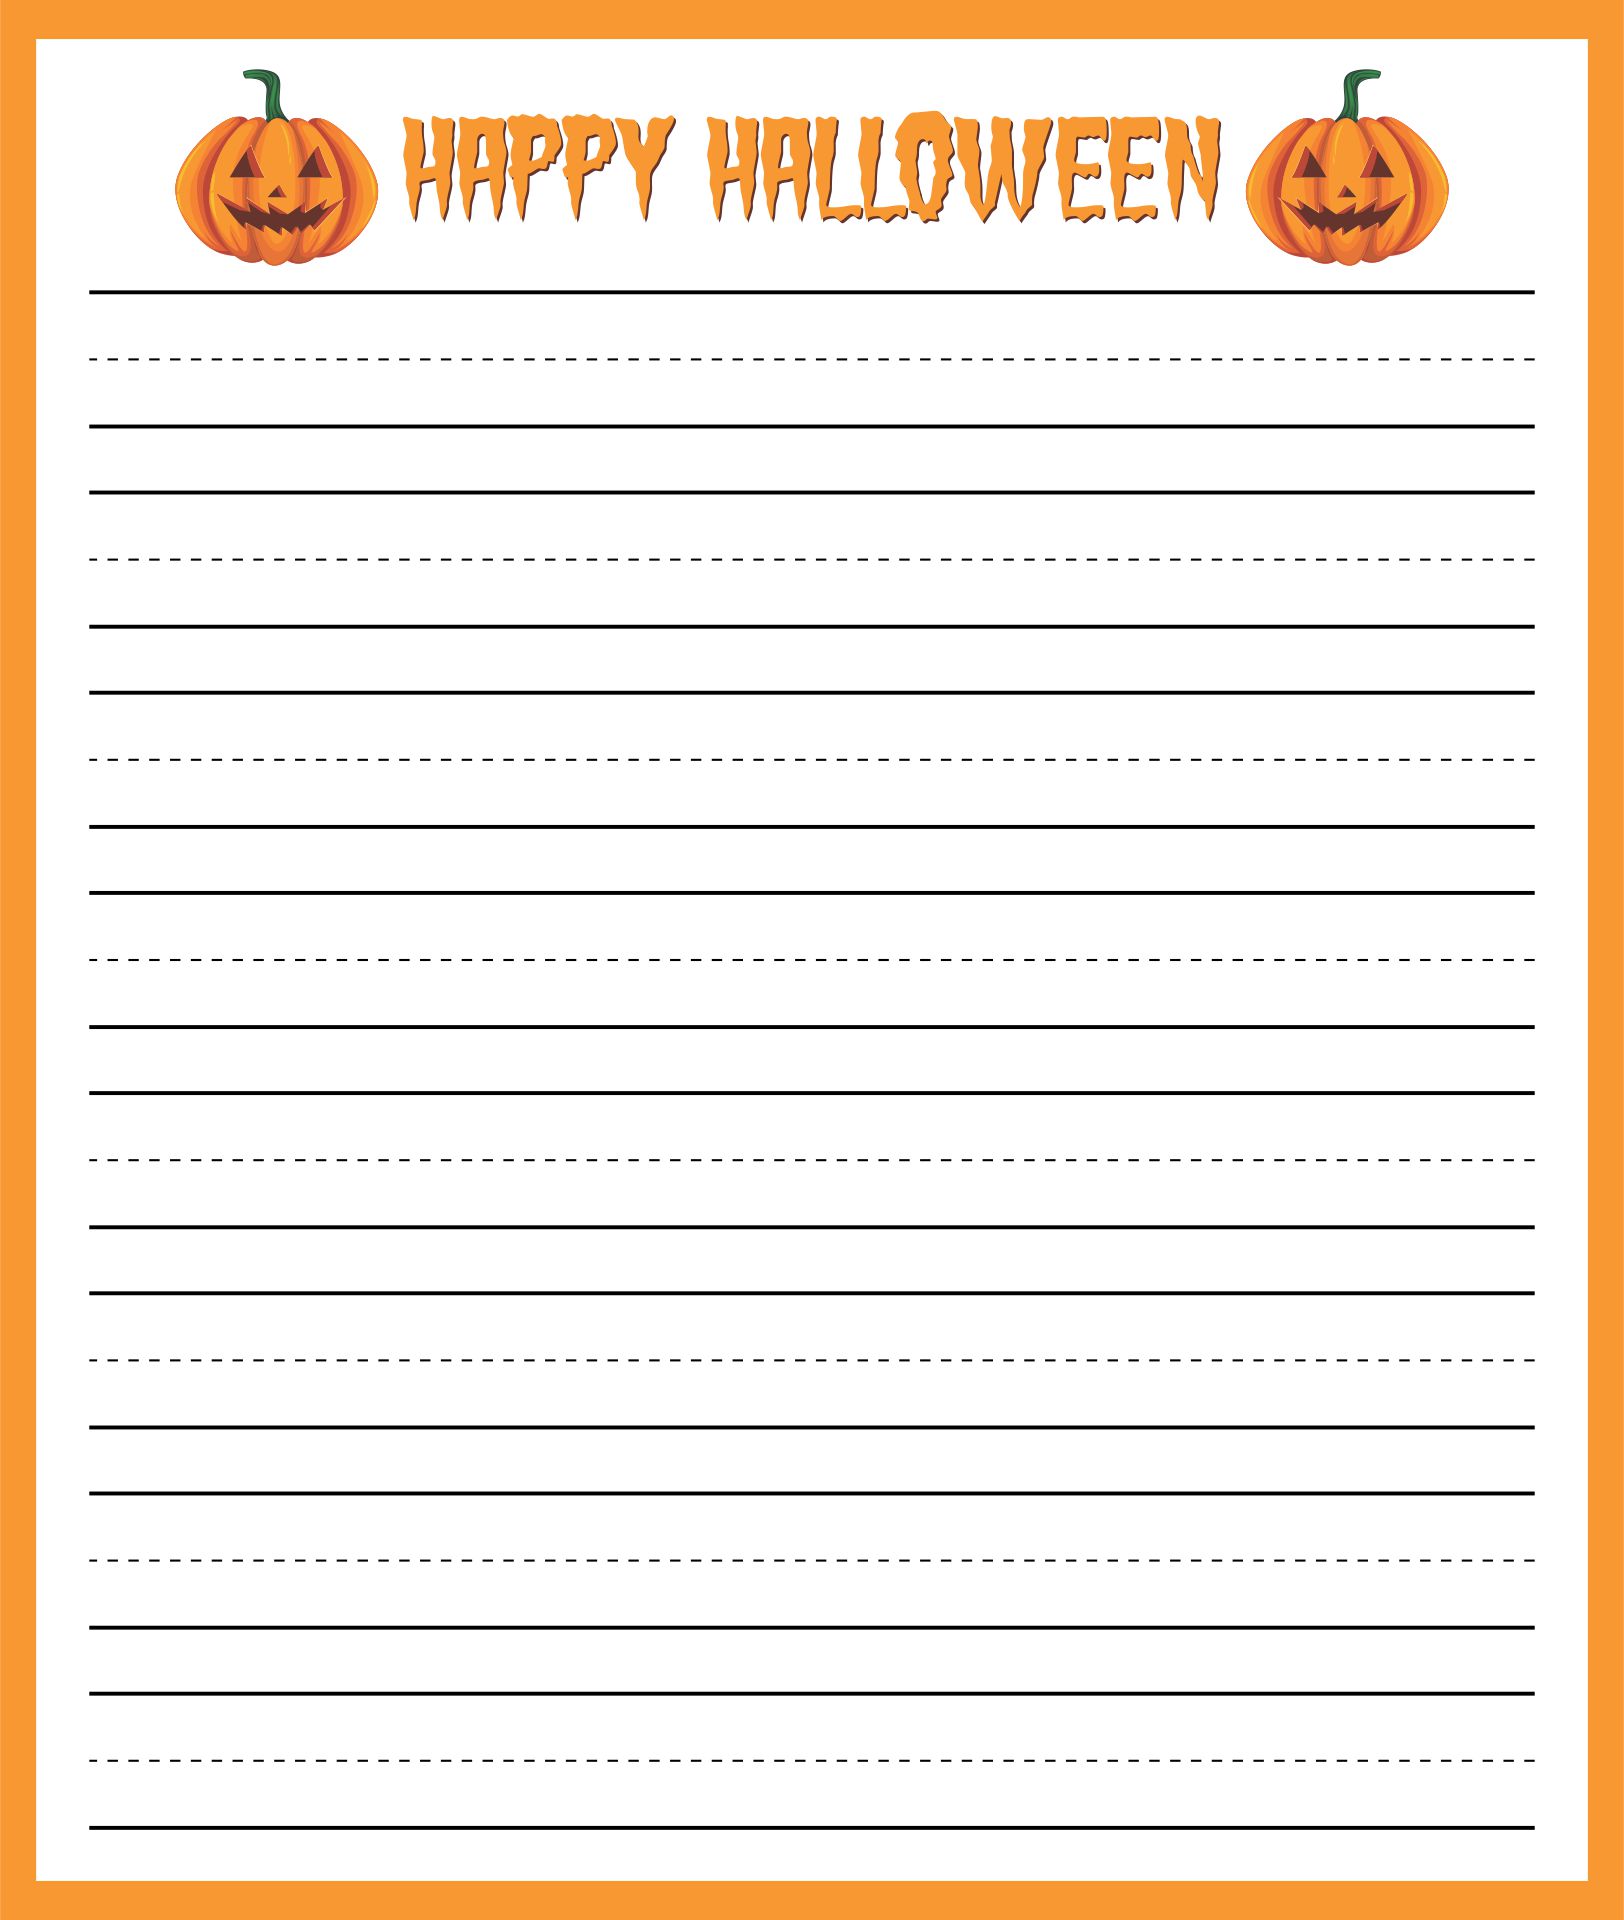 6 Best Images of Free Printable Halloween Lined Writing Paper Free